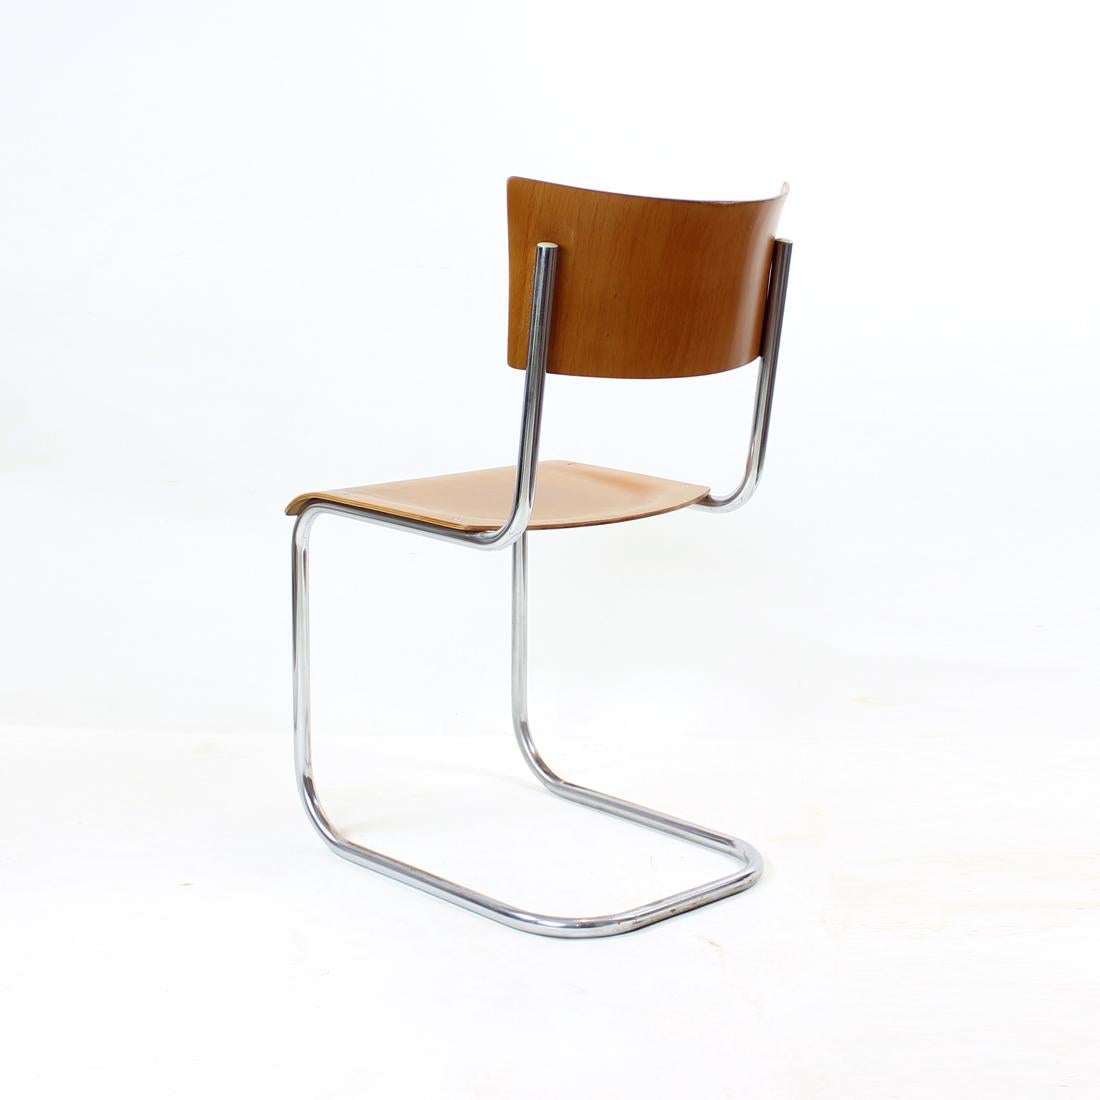 Czech Tubular Chair with Molded Plywood, Mart Stam Design for Thonet, 1950s